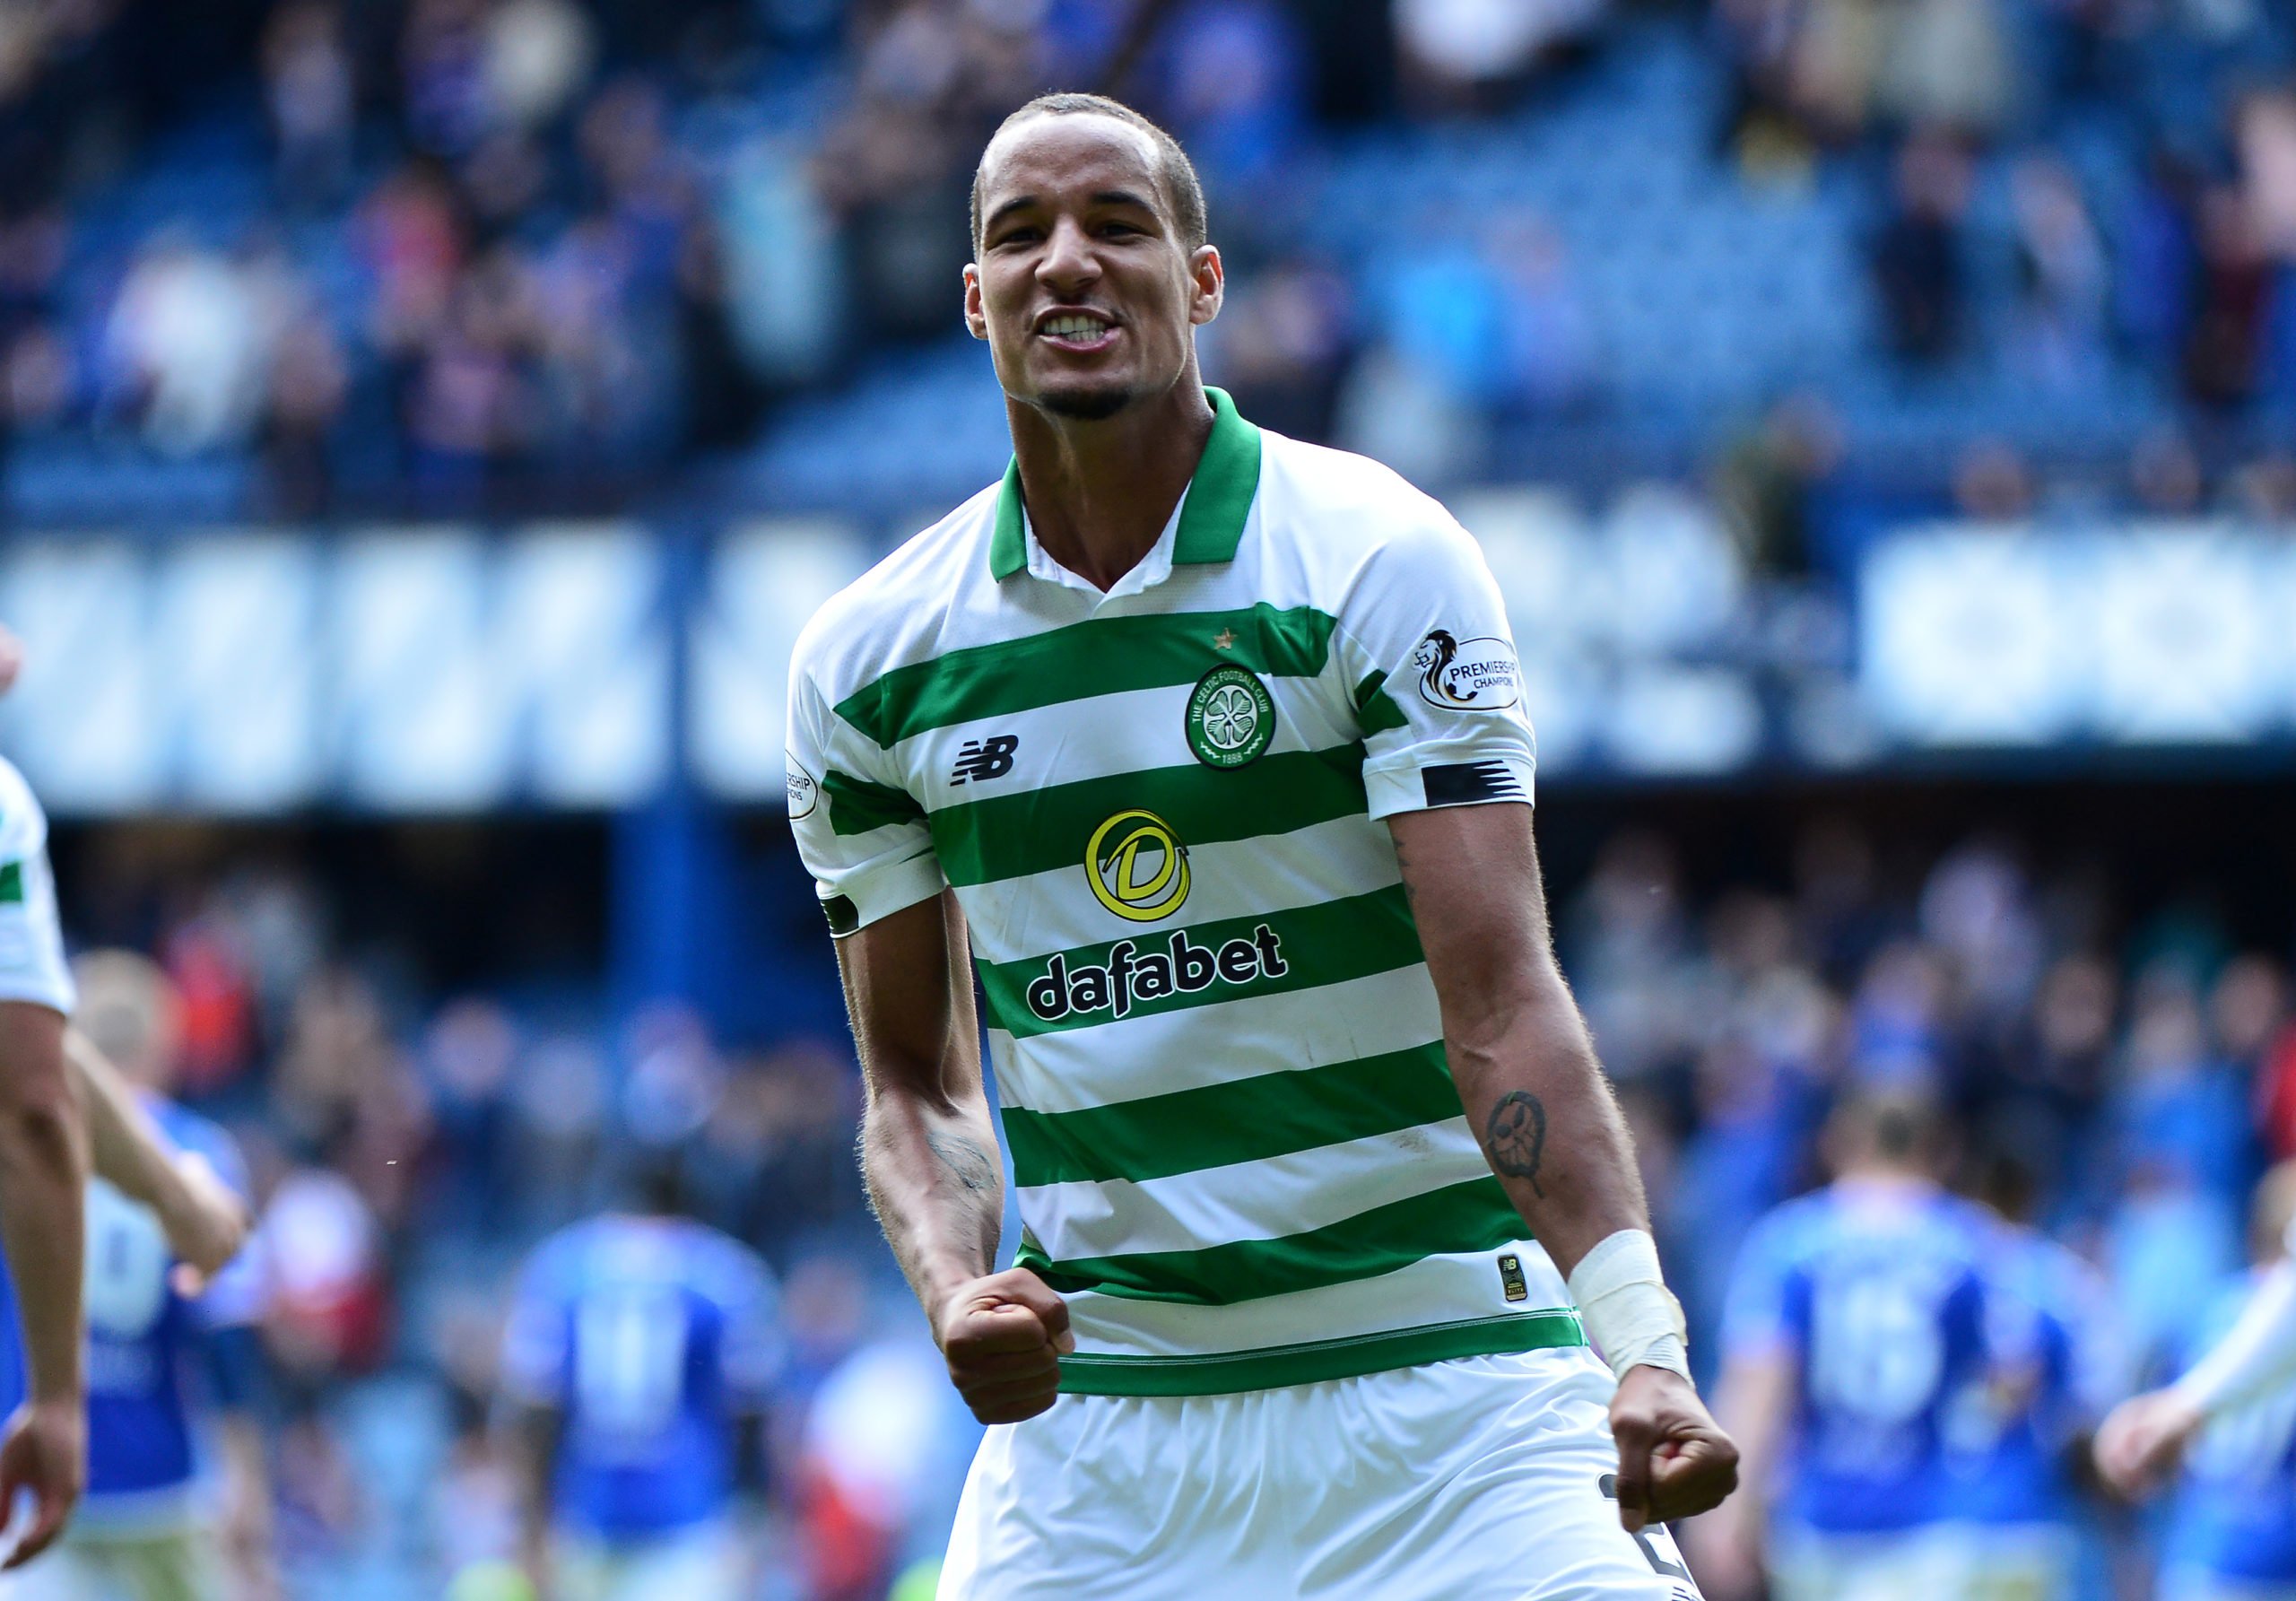 Celtic boss gives injury update; Jullien a doubt for Milan but Christie may return